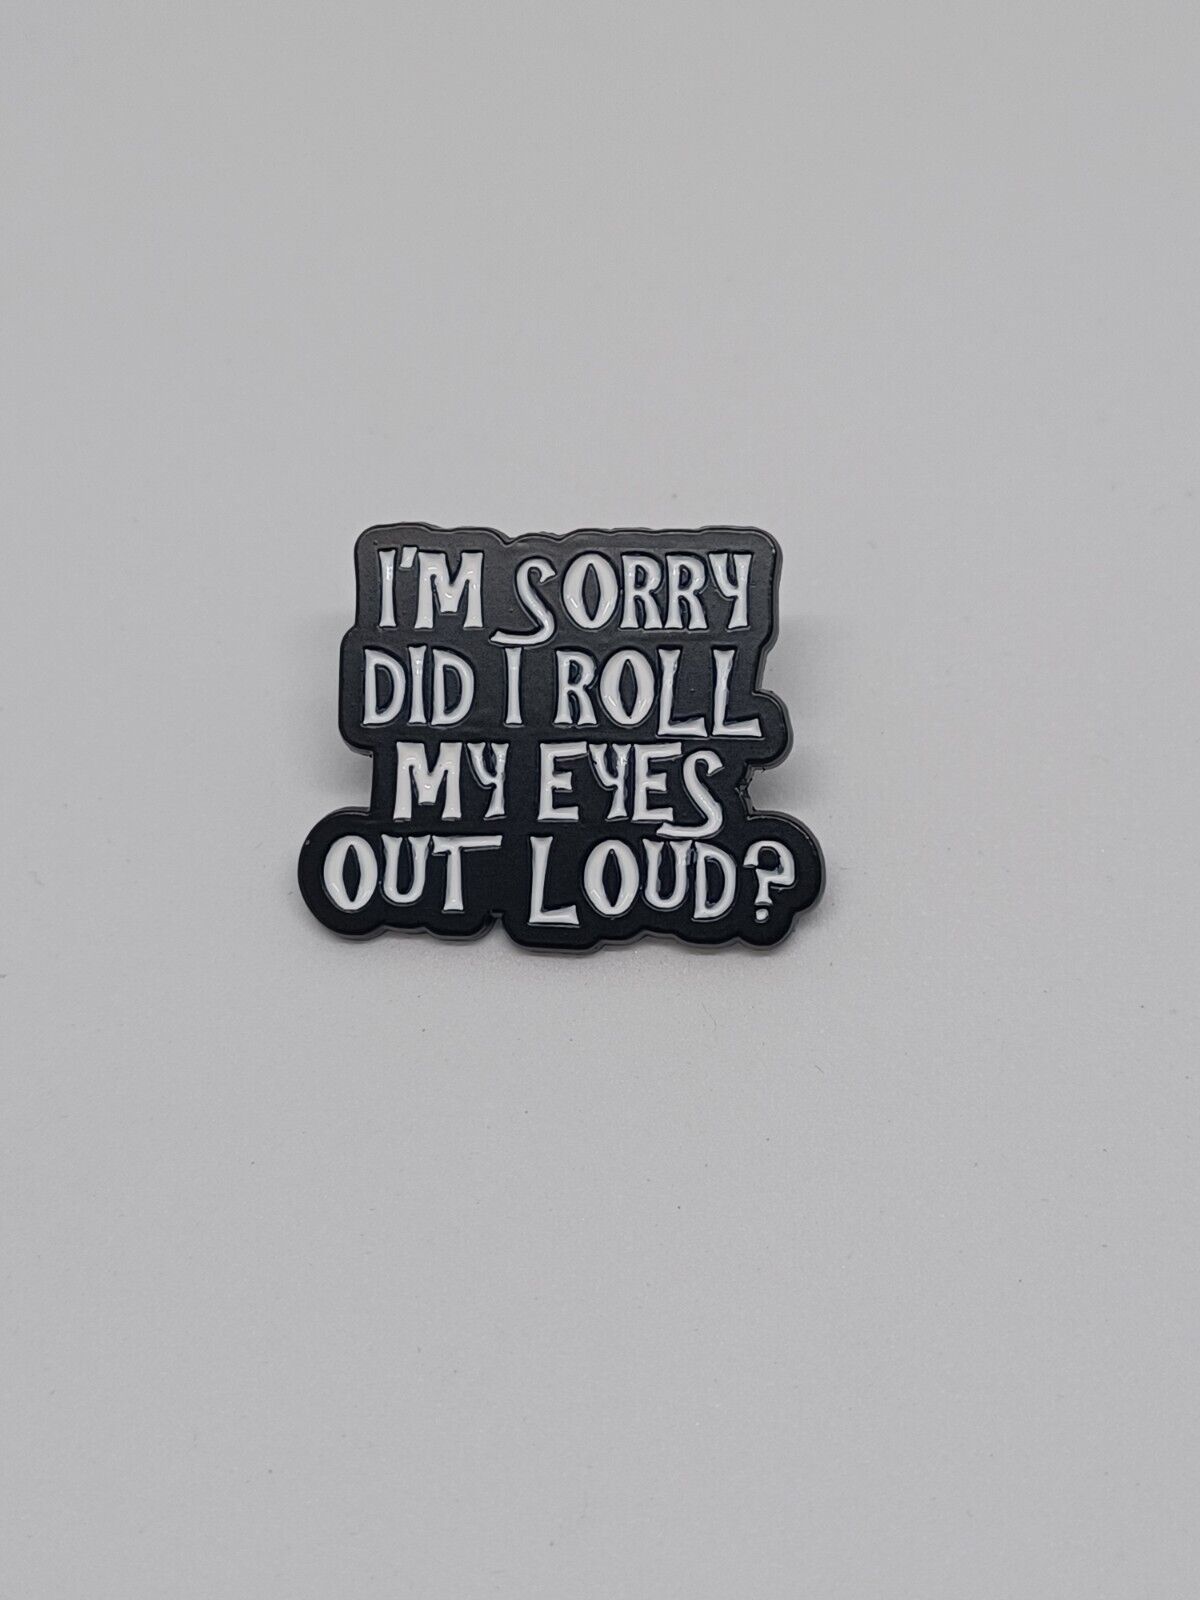 I'm Sorry Did I Roll My Eyes Out Loud Funny Novelty Brooch Enamel Lapel Pin